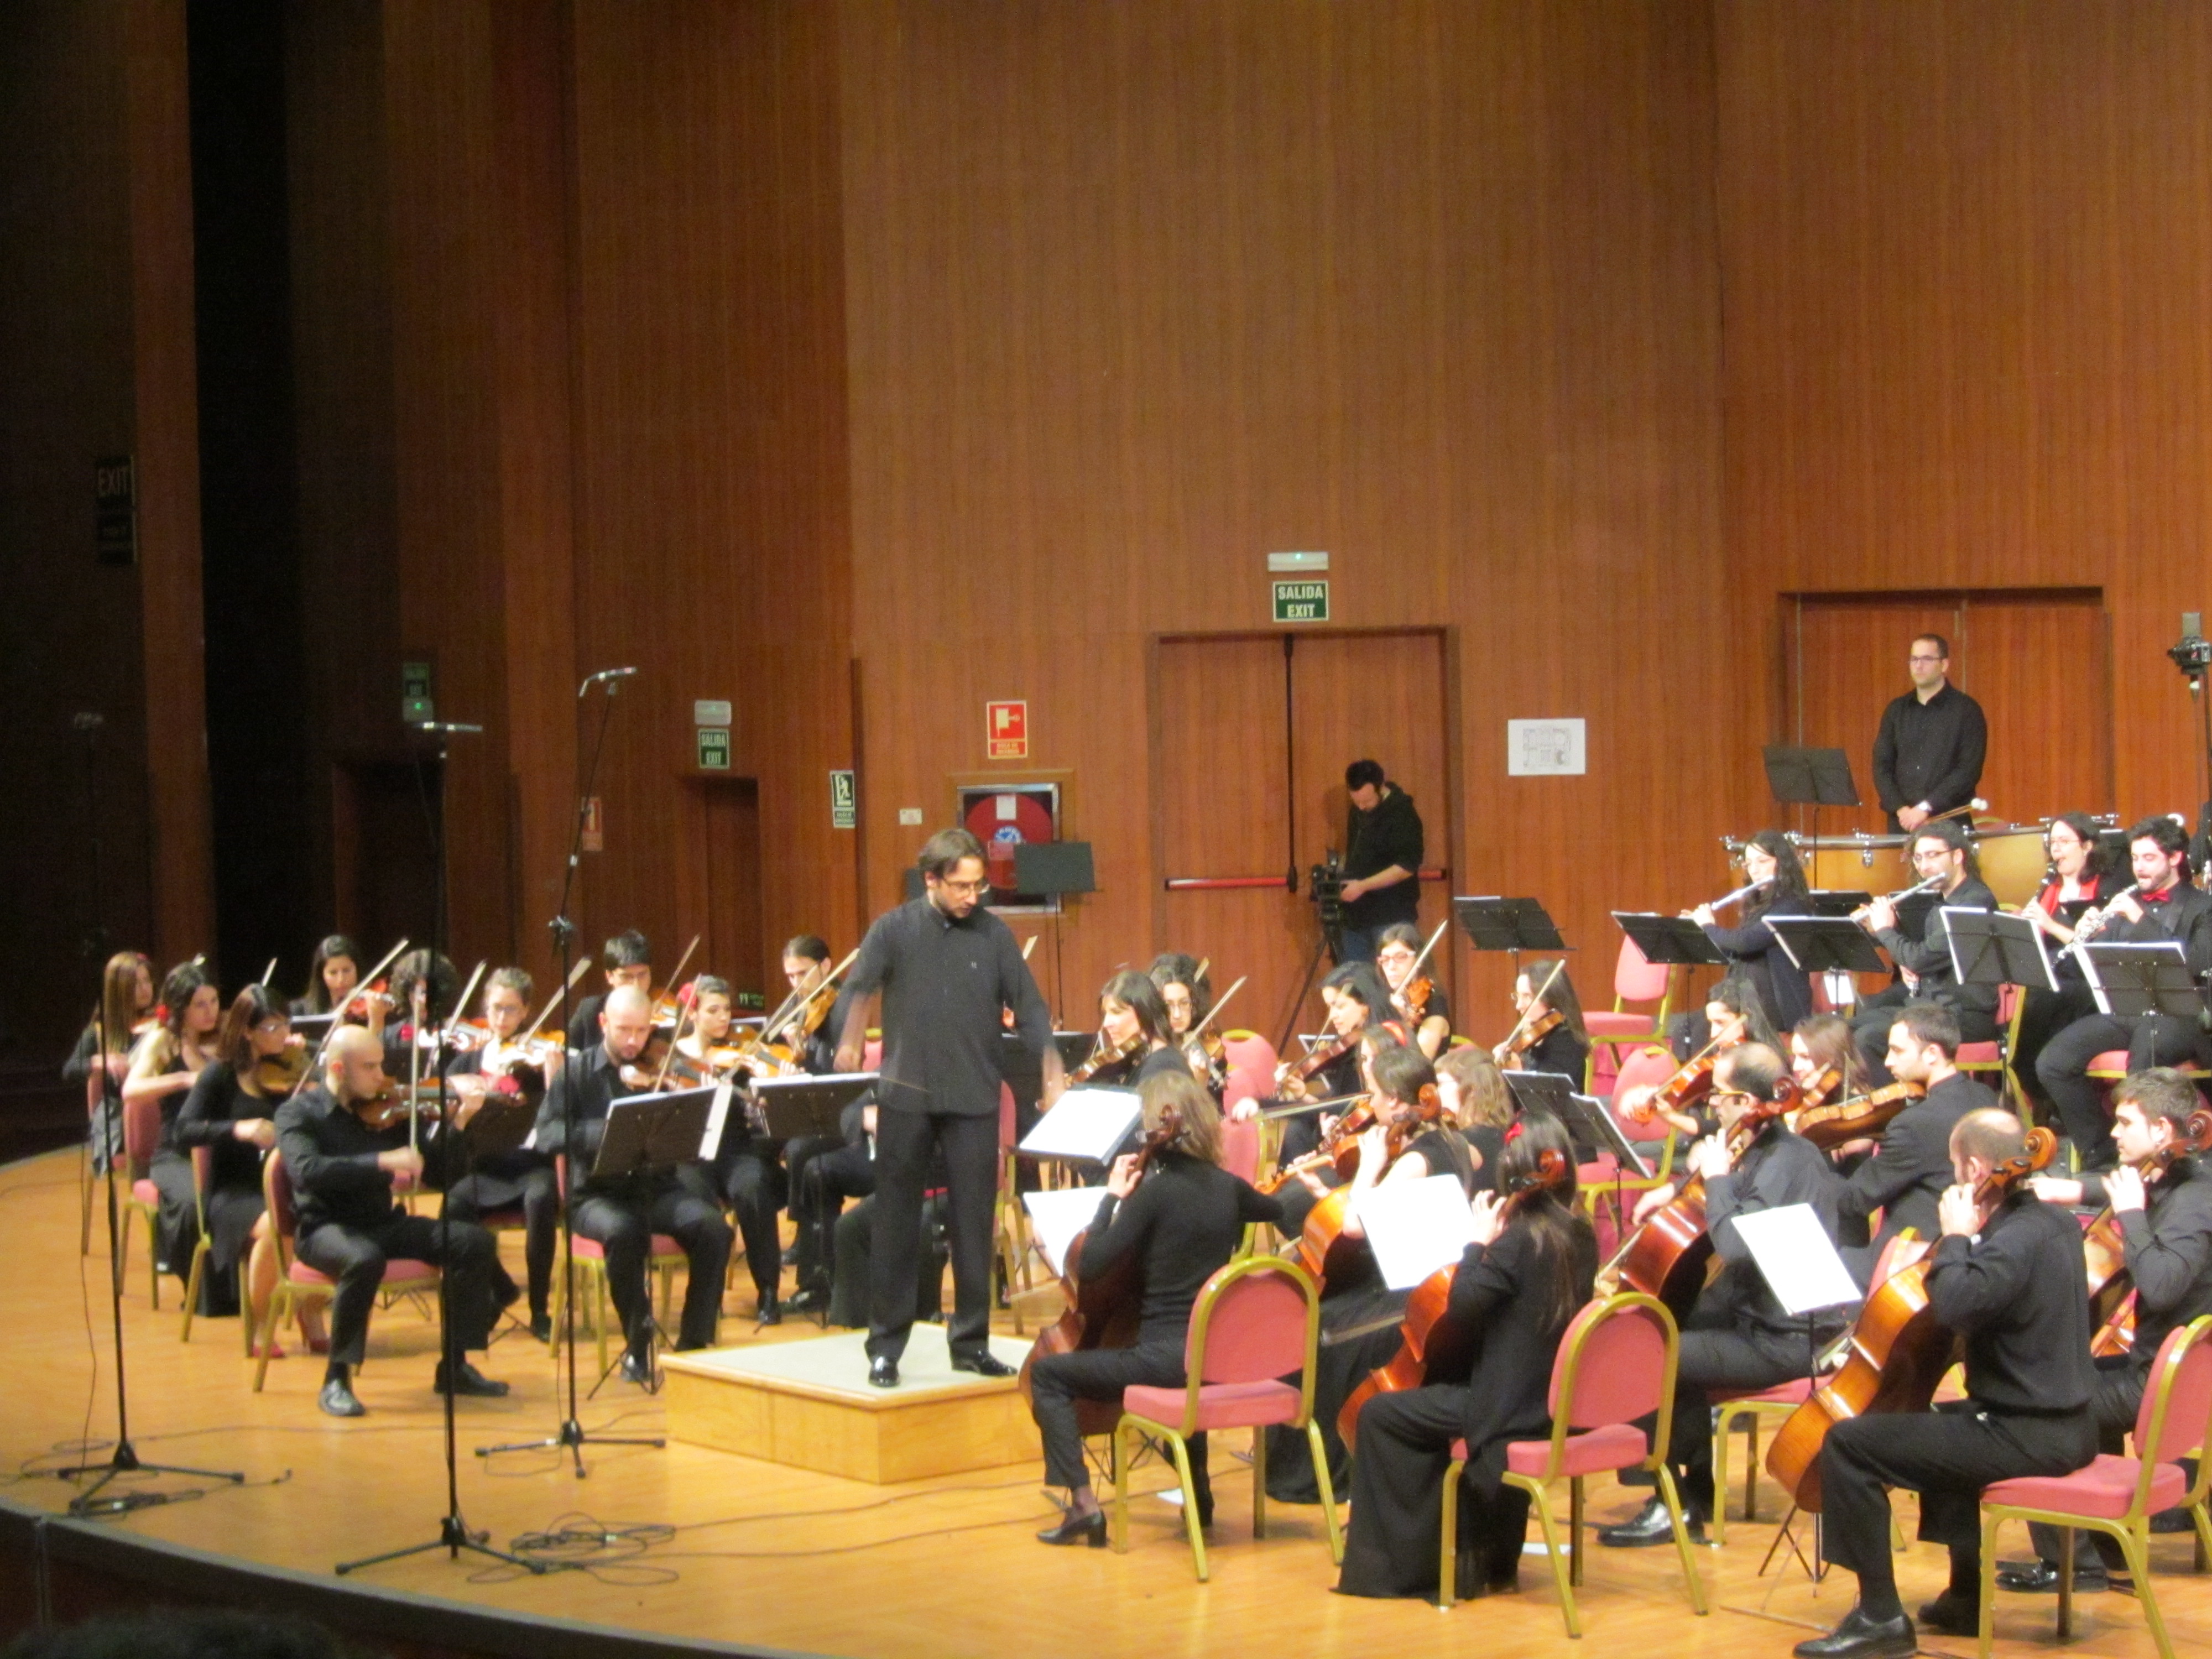 Inaguration of Marmúsica in Madrid with a symphonic music concert